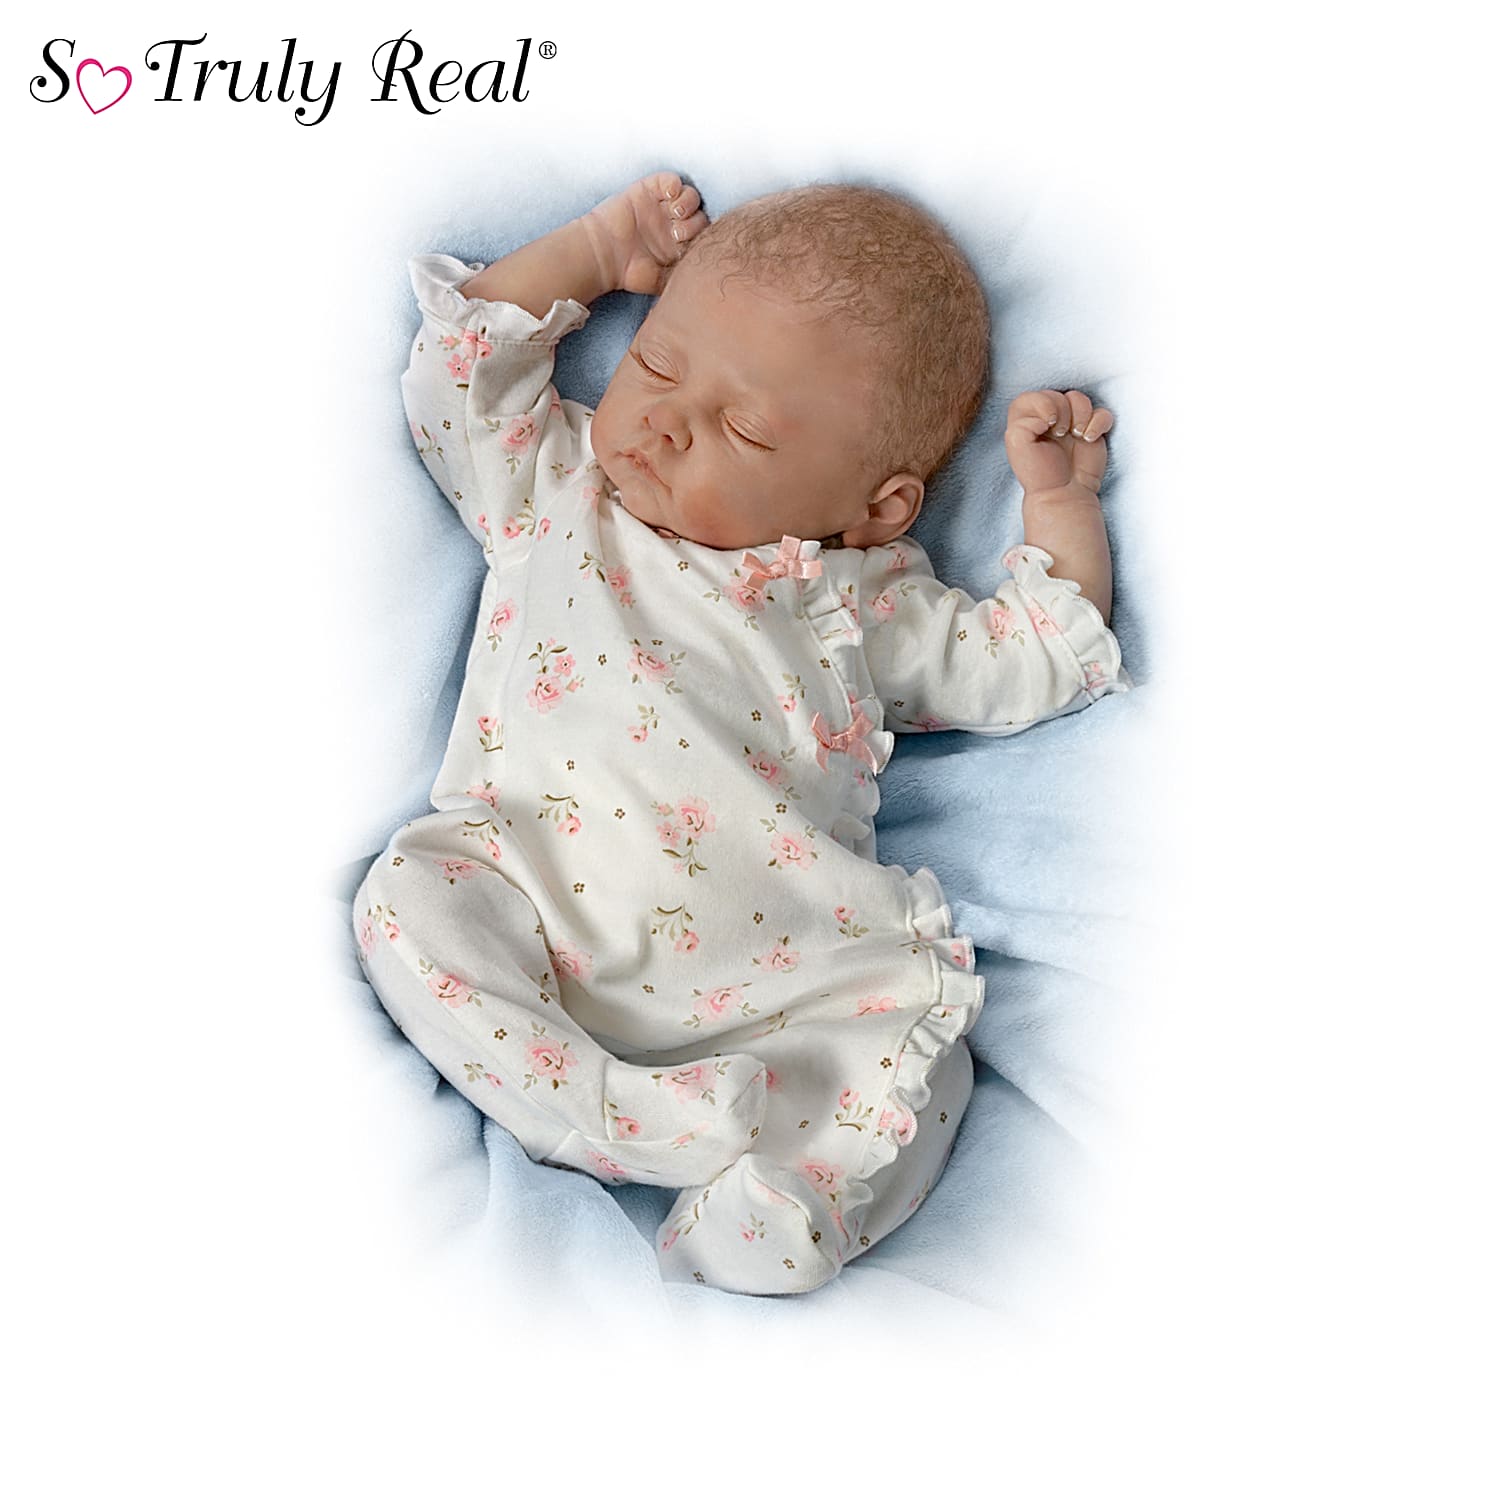 Lifelike Baby Doll Collection: Every Moment Is Precious